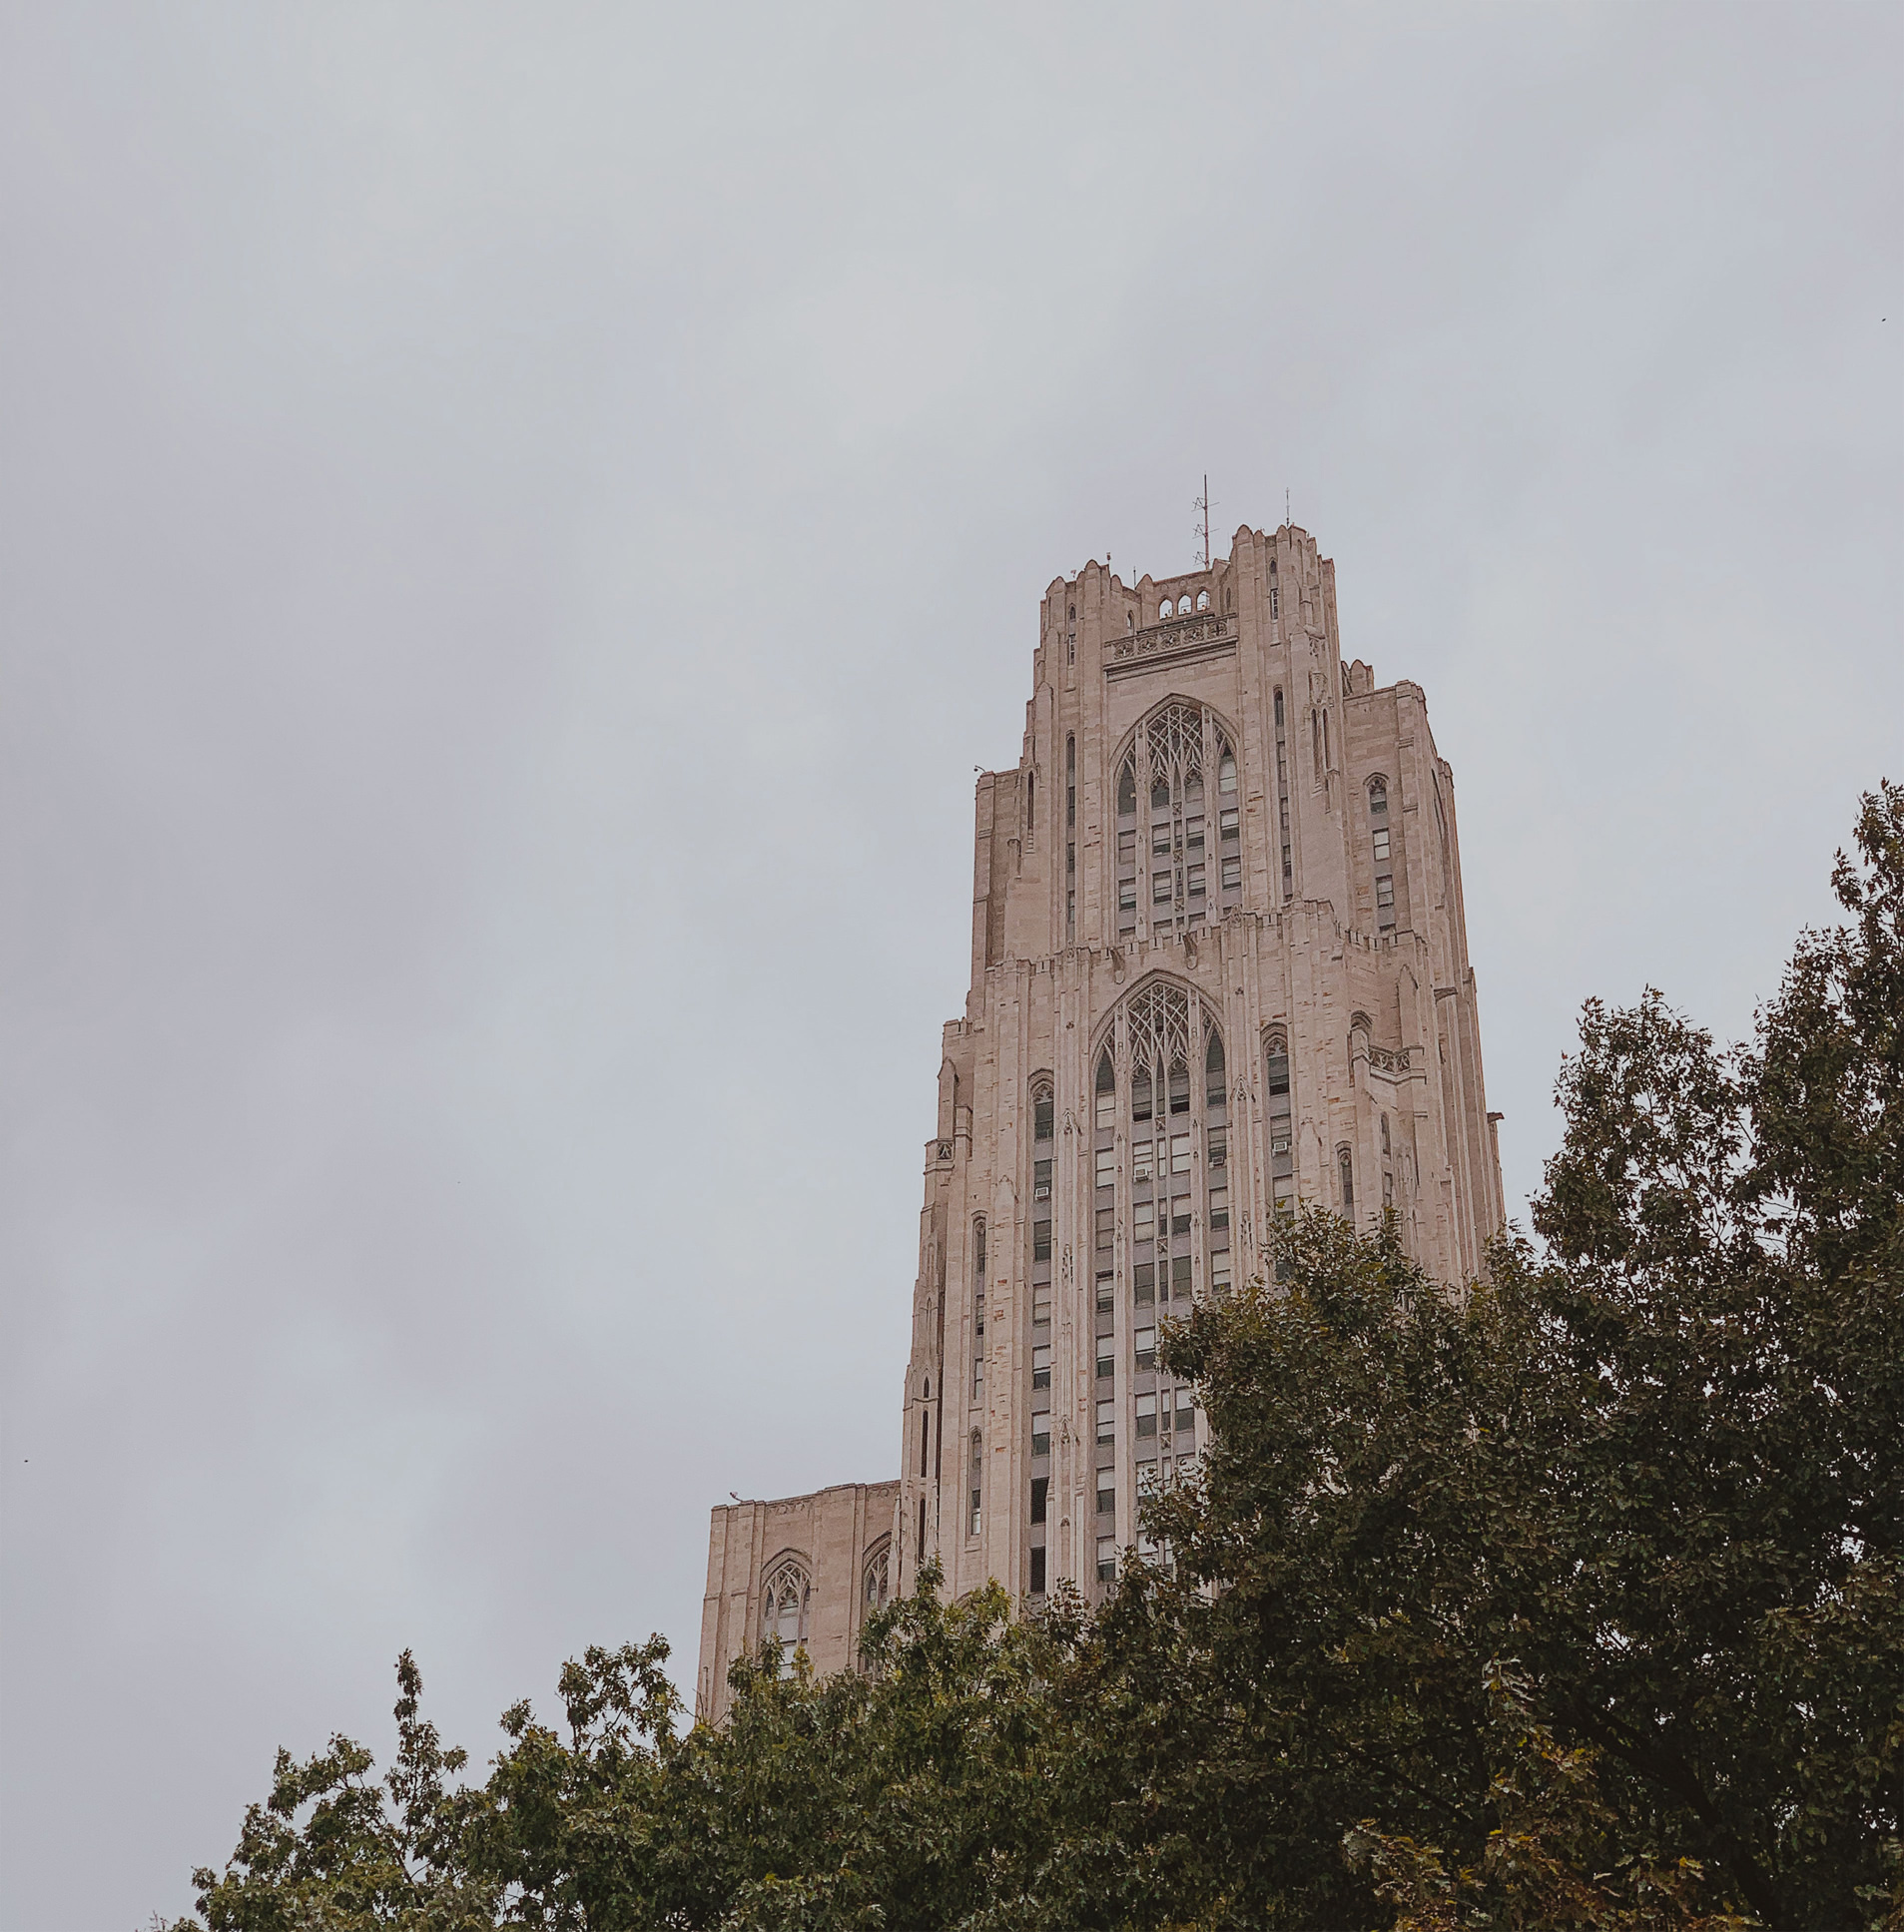 The Cathedral of Learning as seen from the ground